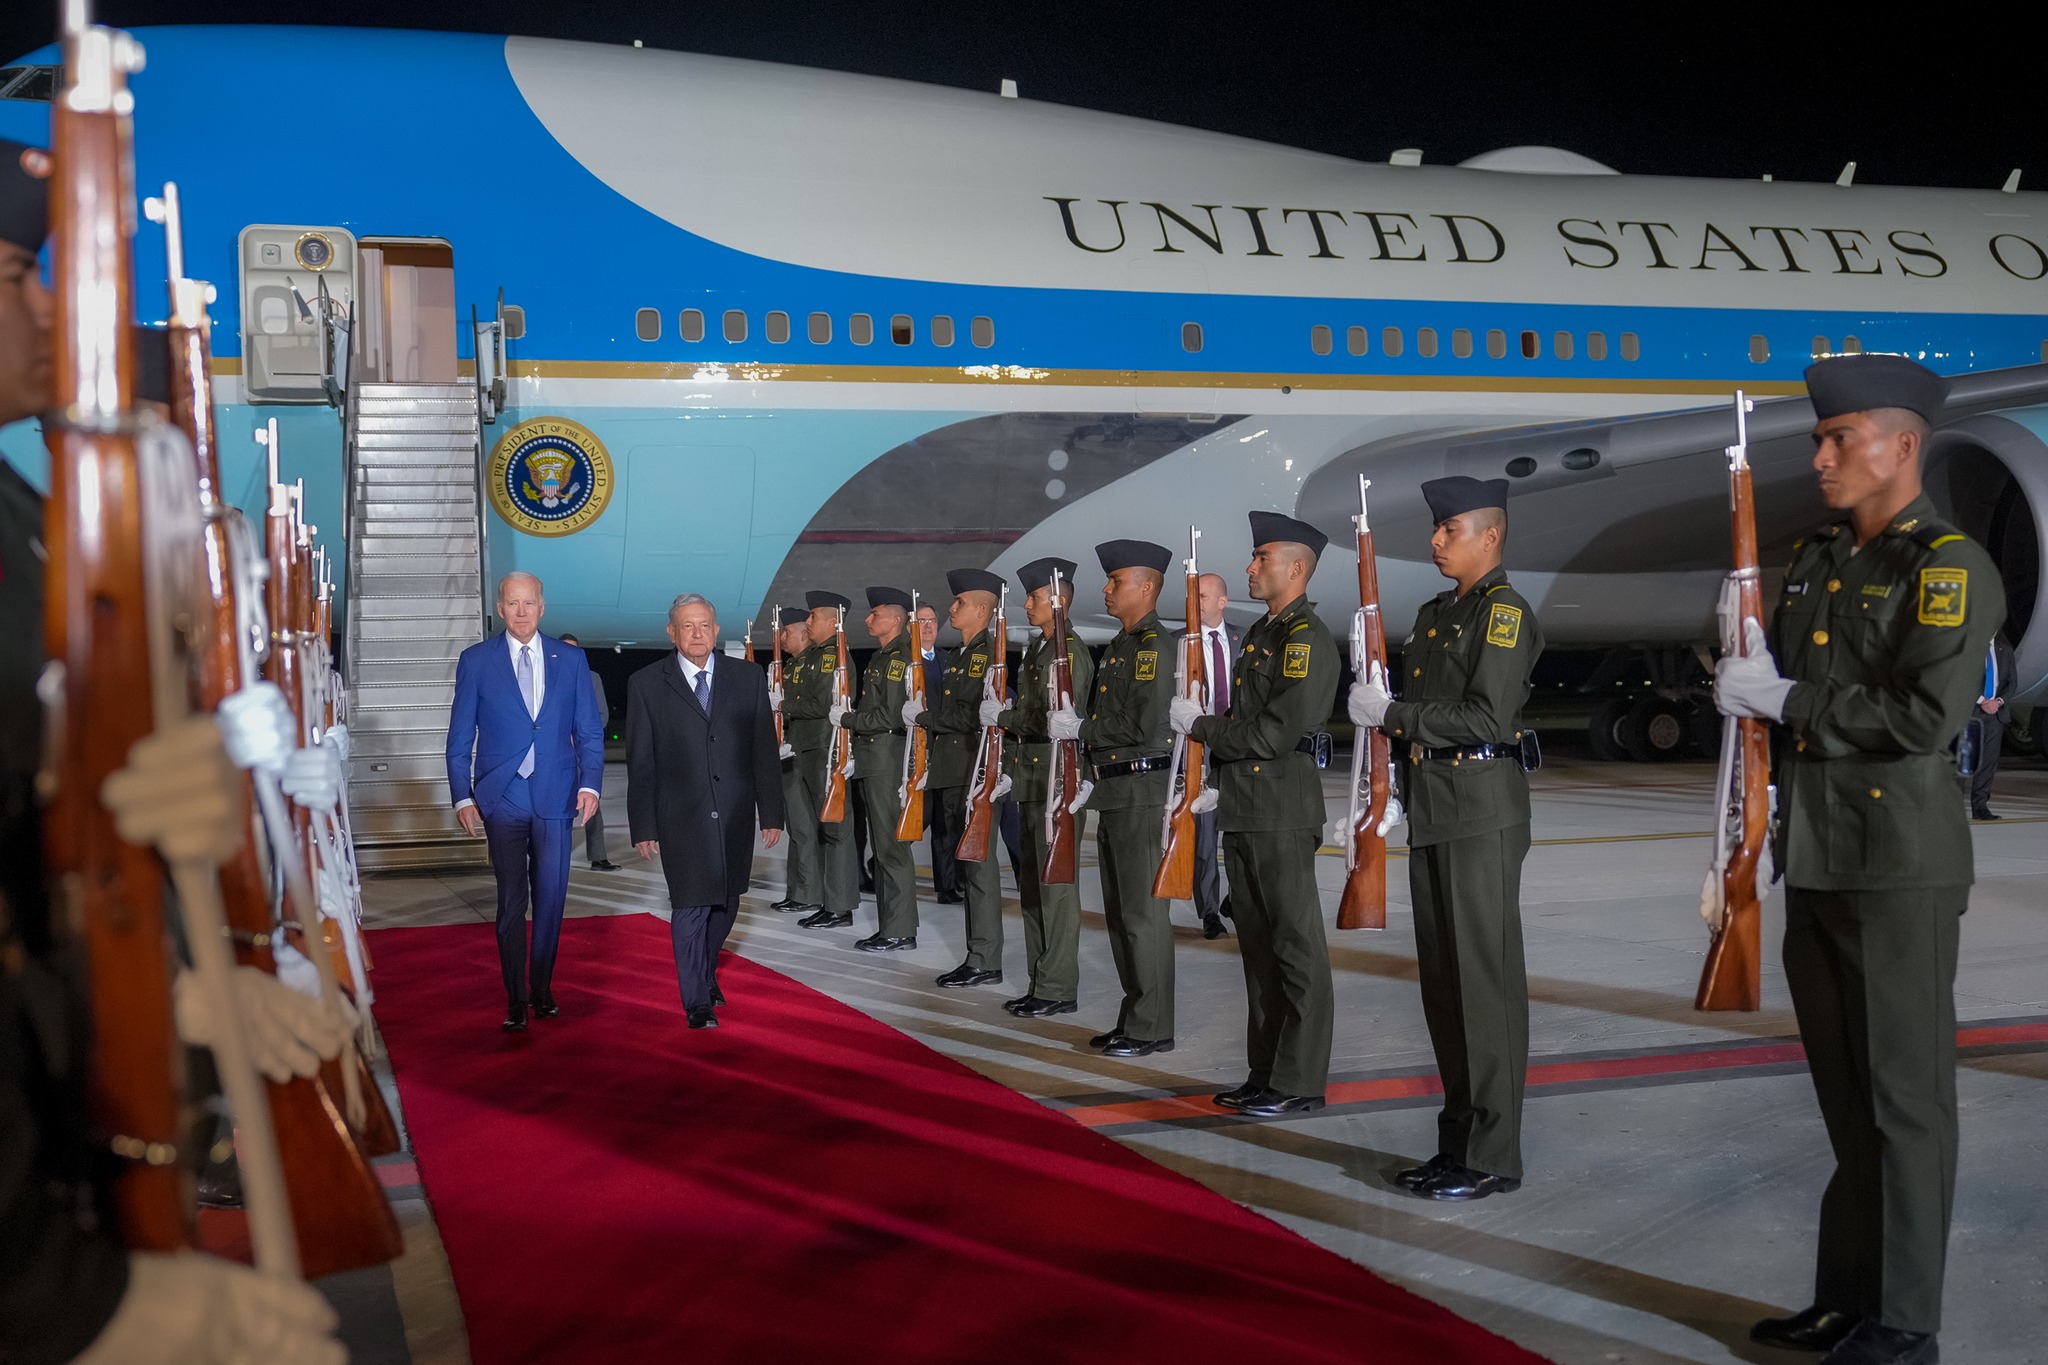 President Biden arrives in Mexico for a meeting with Mexican President Obrador and Canadian Prime Minister Justin Trudeau